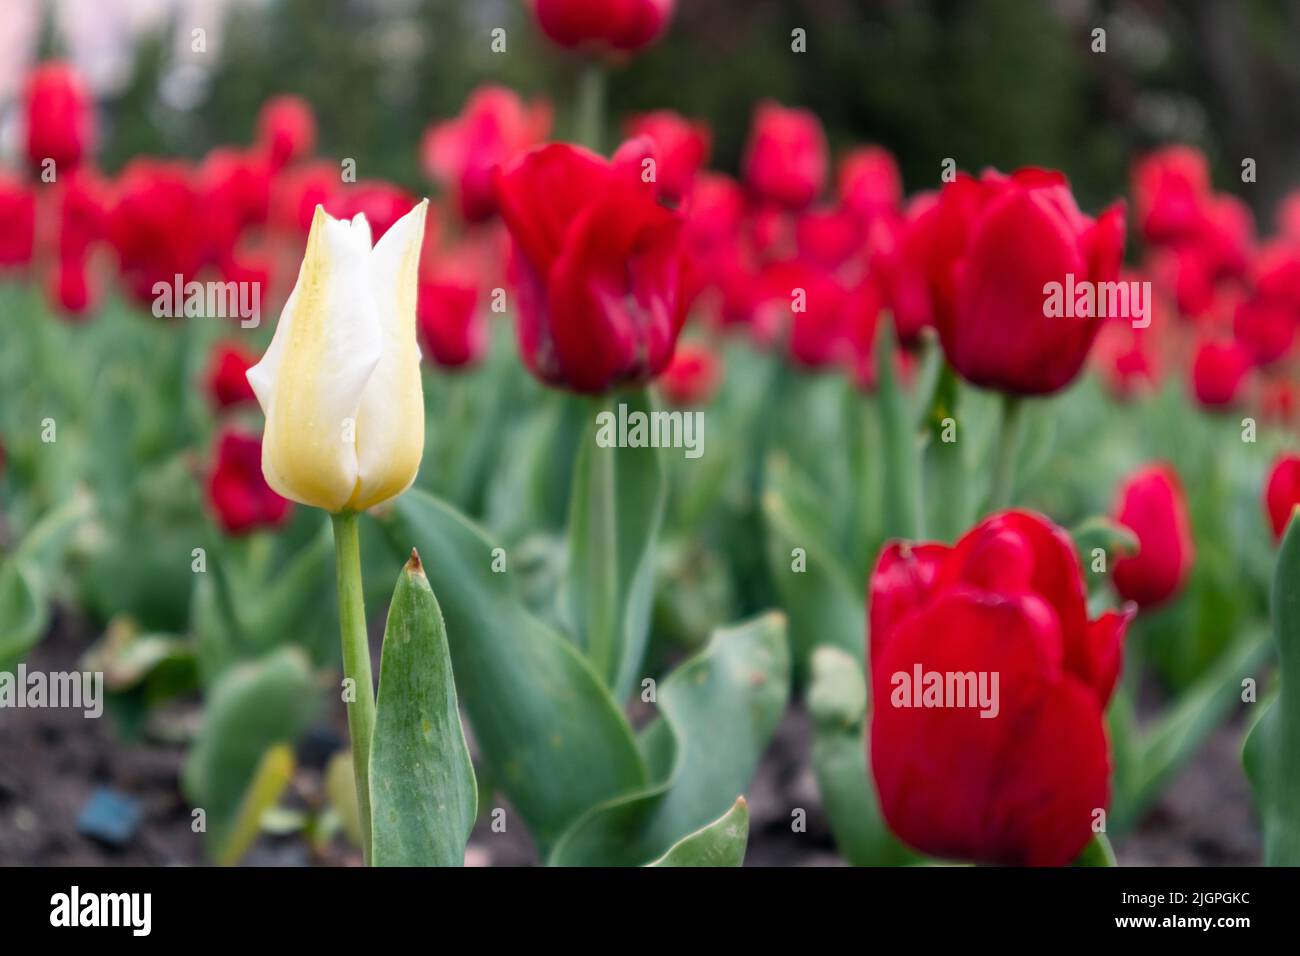 White and red tulip flowers field, flower bed close-up, spring bloom with blurred background. Romantic fresh meadow foliage Stock Photo